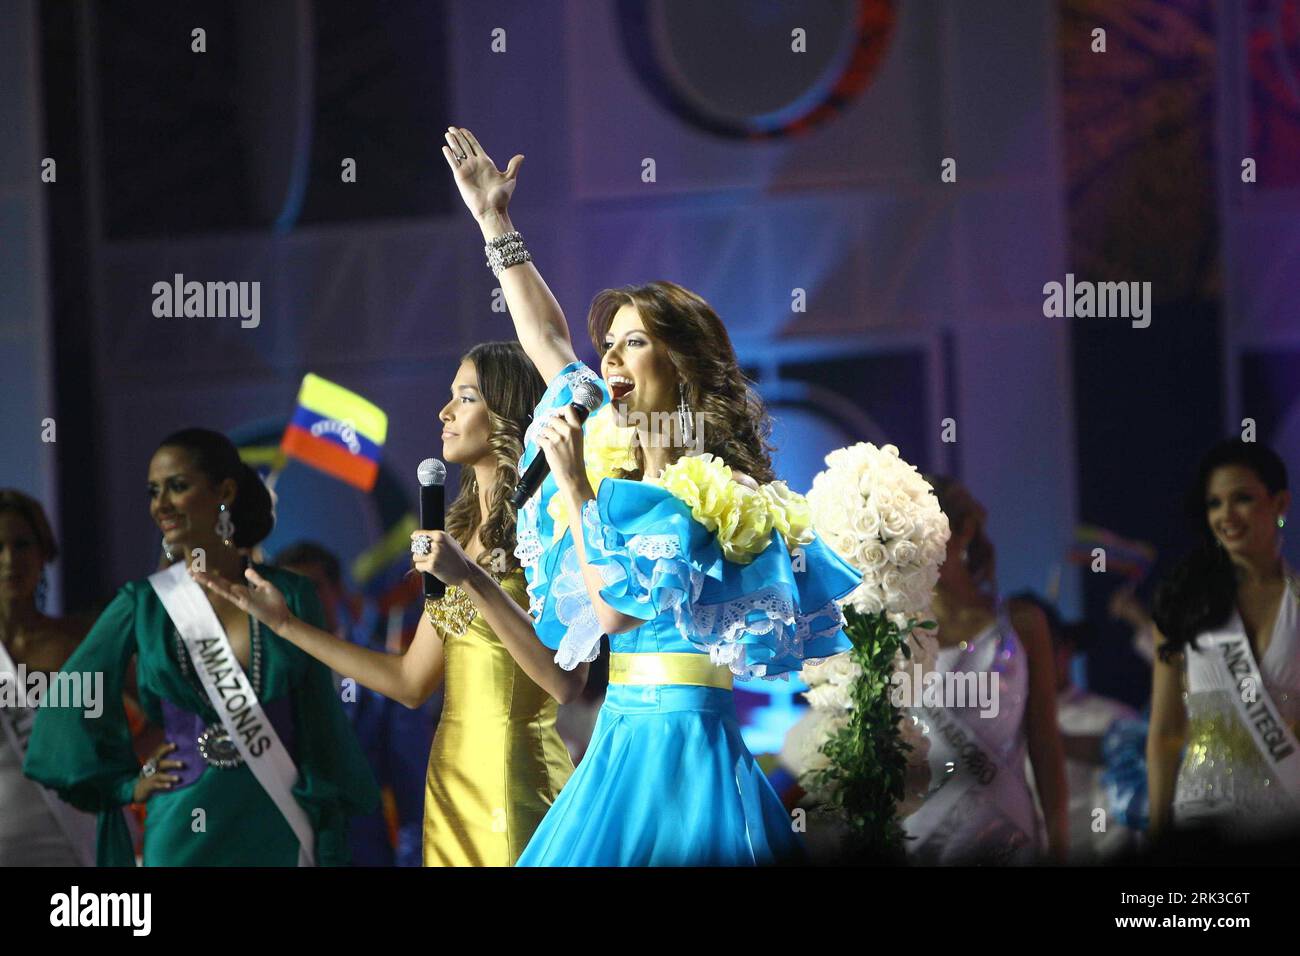 Bildnummer: 53429970  Datum: 24.09.2009  Copyright: imago/Xinhua (090924) -- CARACAS, Sept. 24, 2009 (Xinhua) -- Miss Universe 2009 Stefania Fernandez (front) speaks to audience during the Miss Venezuela 2009 beauty pageant in Caracas, capital of Venezuela, Sept. 24, 2009. Marelisa Gibson, aged 21 and a college student, won the beauty pageant and will compete for Miss Universe title next year representing Venezuela. (Xinhua/Juan Carlos Hernandez) (zcq) (8)VENEZUELA-CARACAS-MISS VENEZUELA PUBLICATIONxNOTxINxCHN Misswahl Miss Wahl Kbdig xdp 2009 quer o00 Schönheitswettbewerb    Bildnummer 534299 Stock Photo